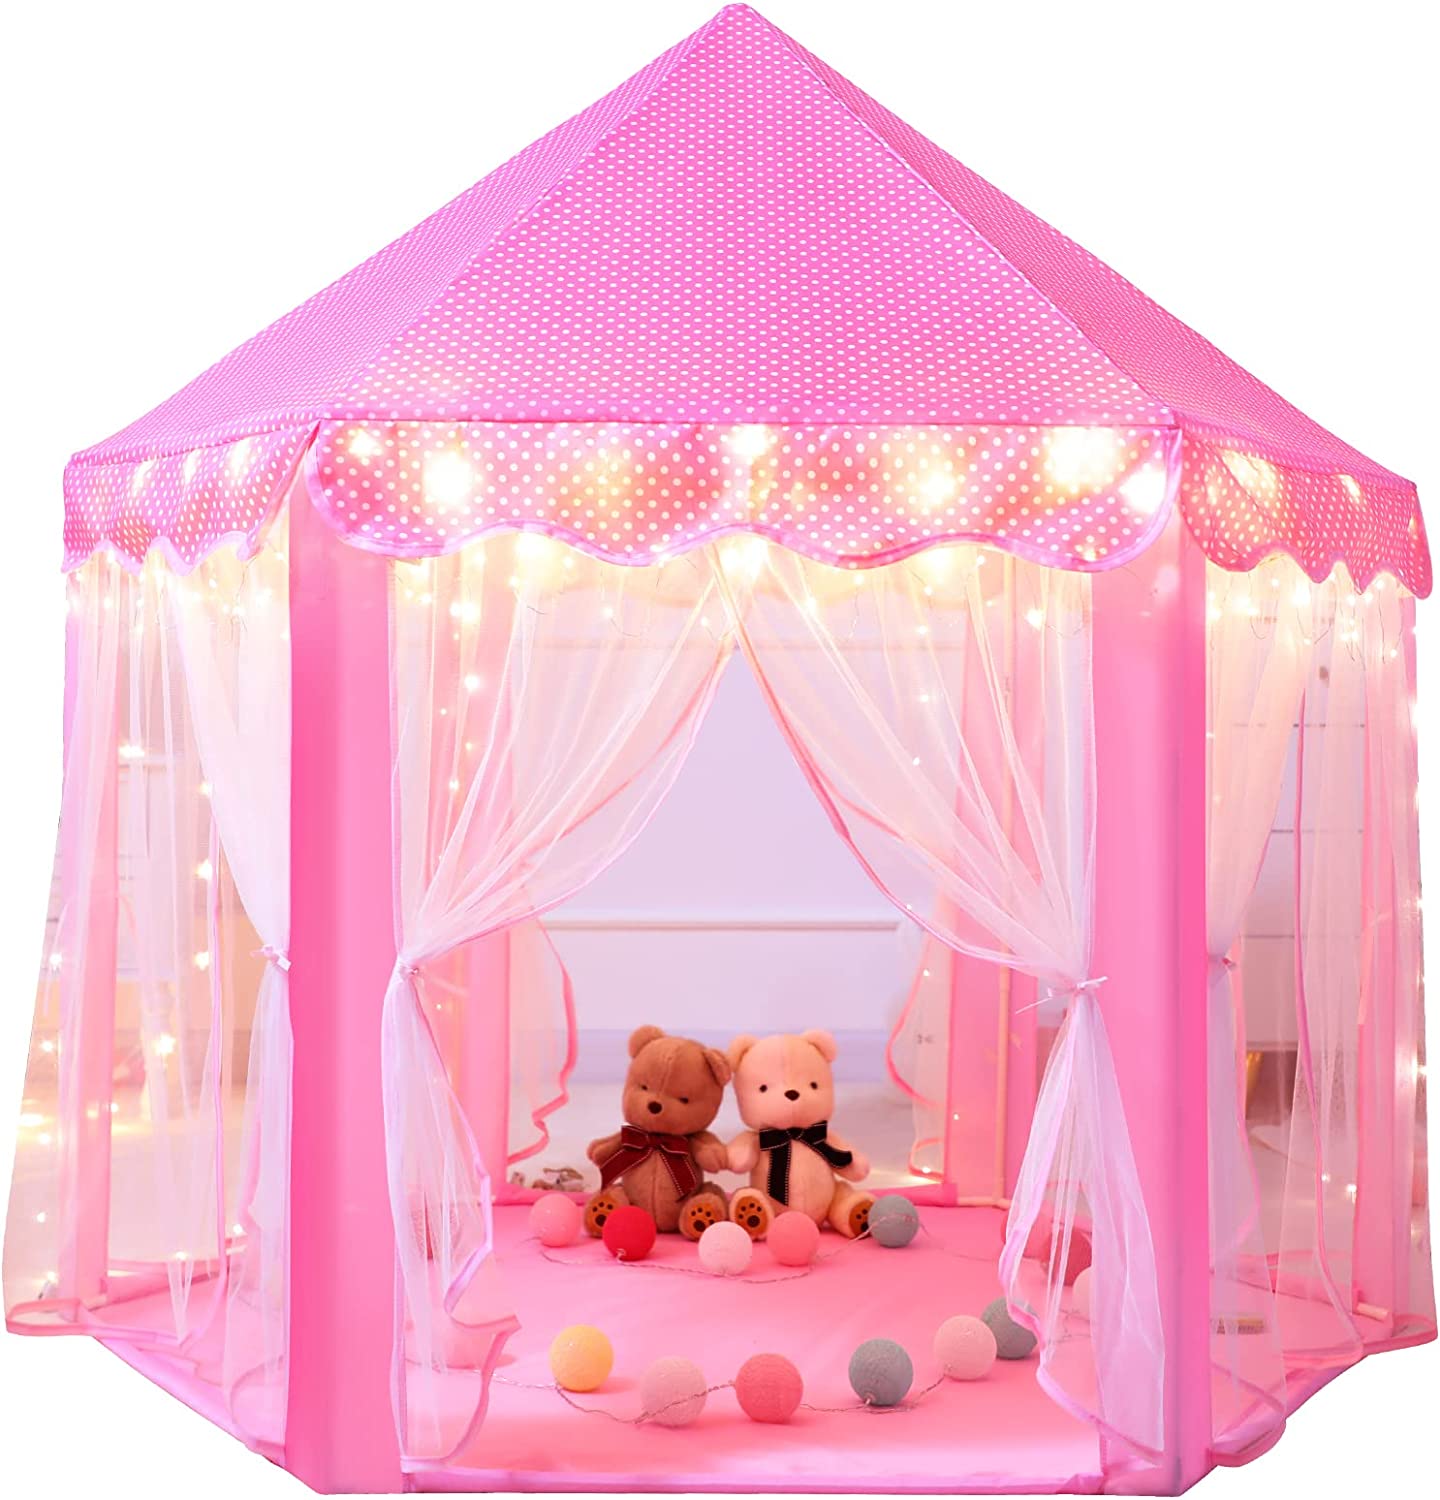  5. Sumbababy Princess Castle Tent 